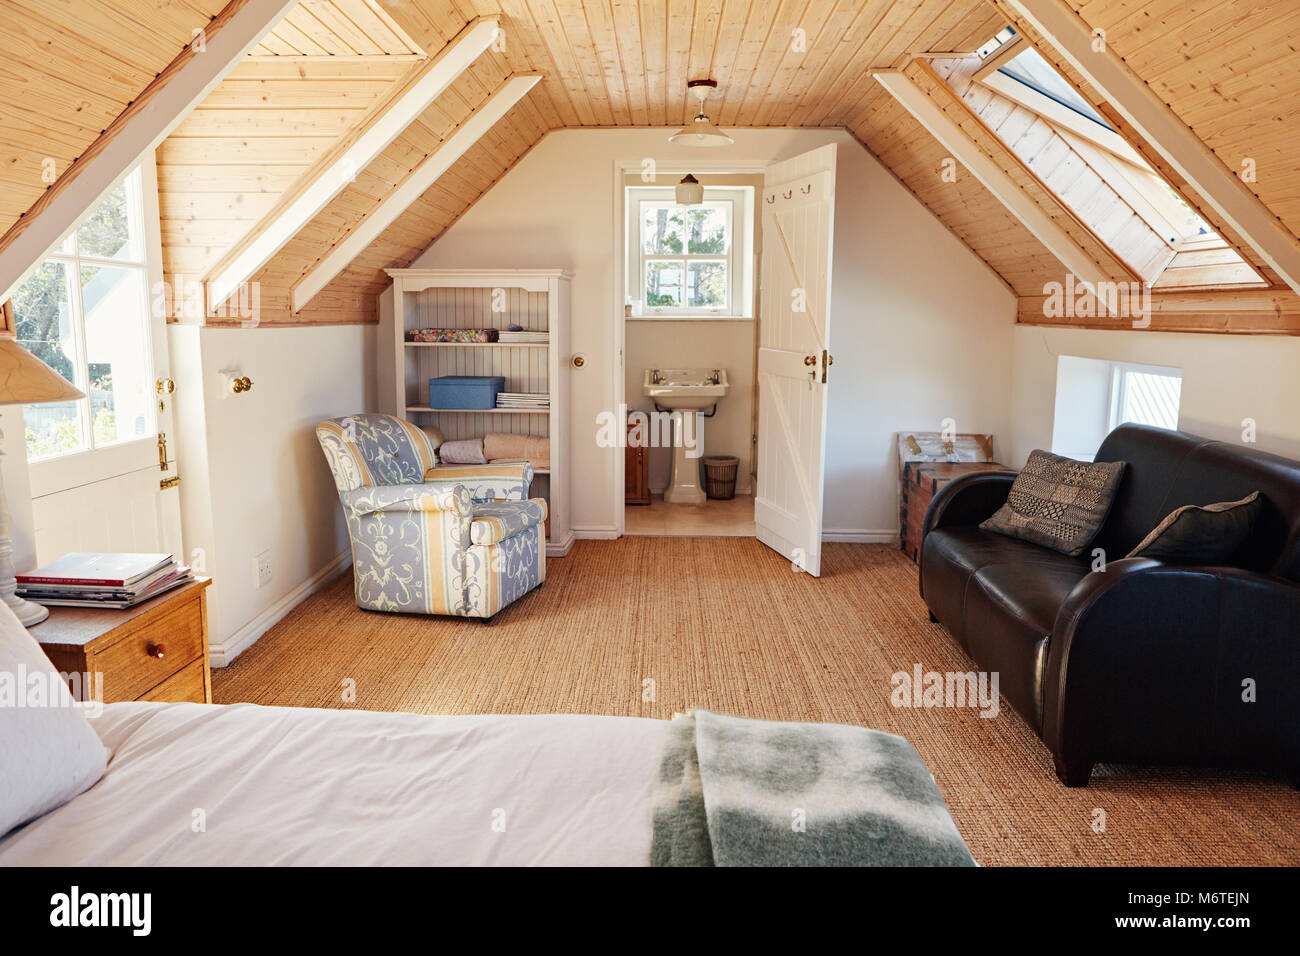 Interior of an attic bedroom with bathroom in a home Stock Photo